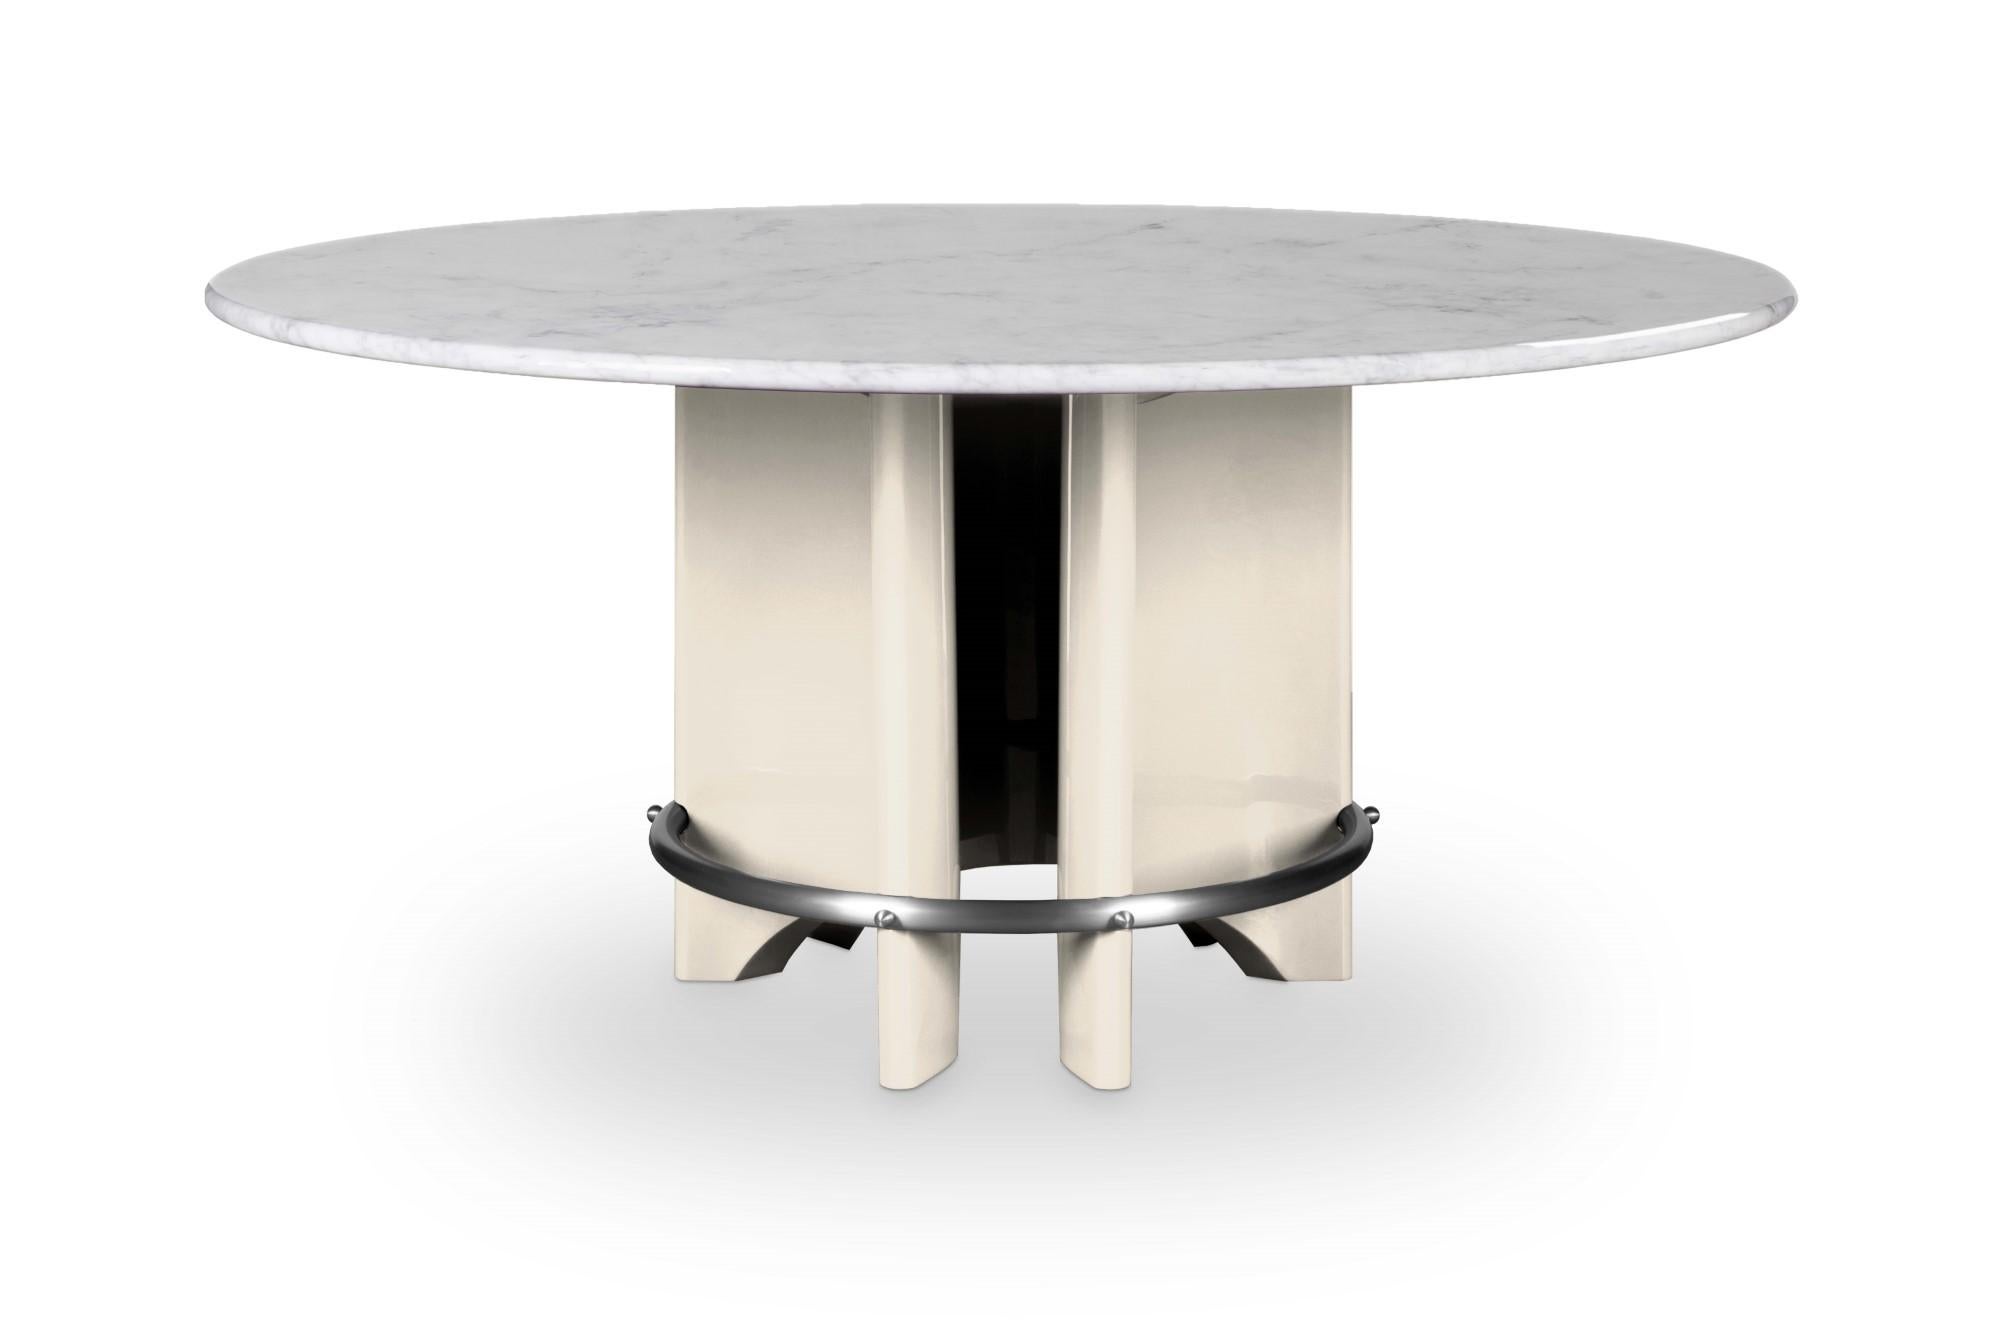 Meyer table by Royal Stranger
Dimensions: D 160 x W 160 x H 75 cm.
Materials: Carrara marble with polished finish, lacquered with glossy finish base, stainless steel ring.

Available in:
Table Top: Carrara Marble, Nero Marquina, Estremoz, Rose